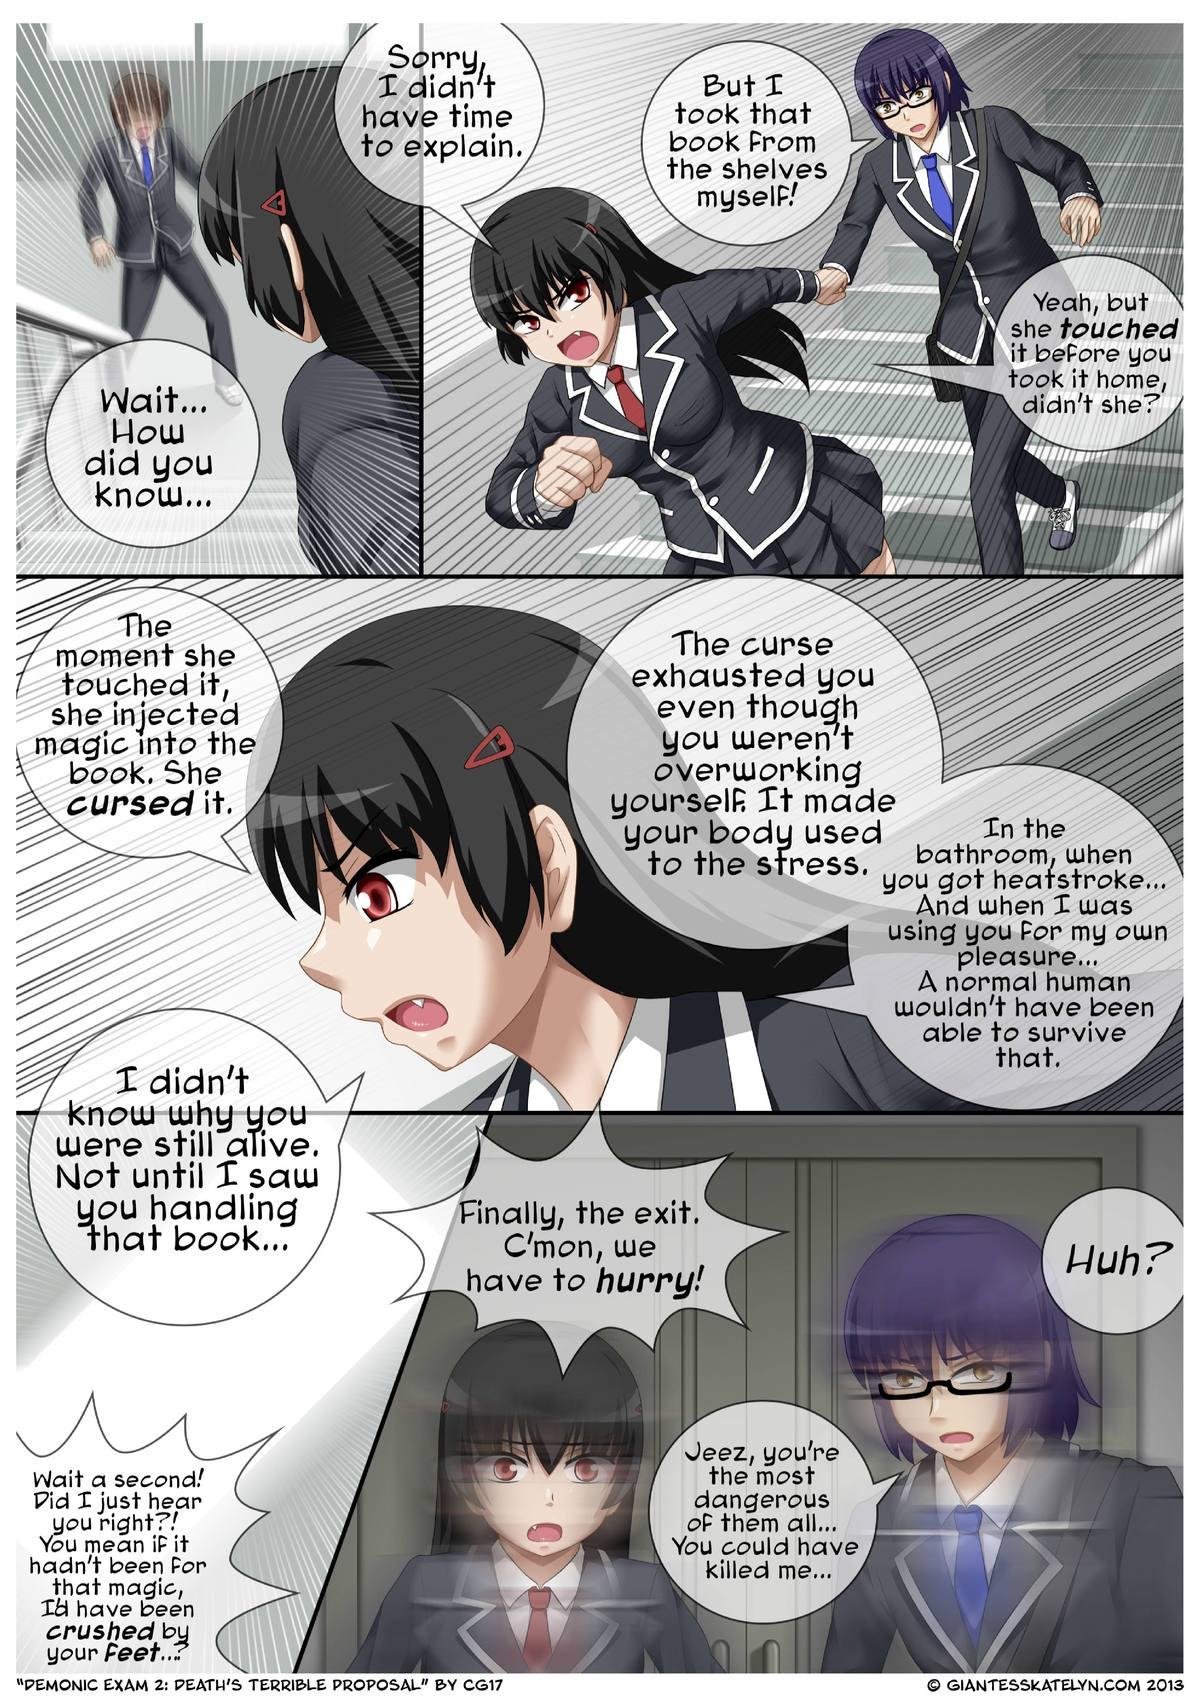 Caiu Na Net Demonic exam 2 Death's Terrible Proposal Consolo - Page 10